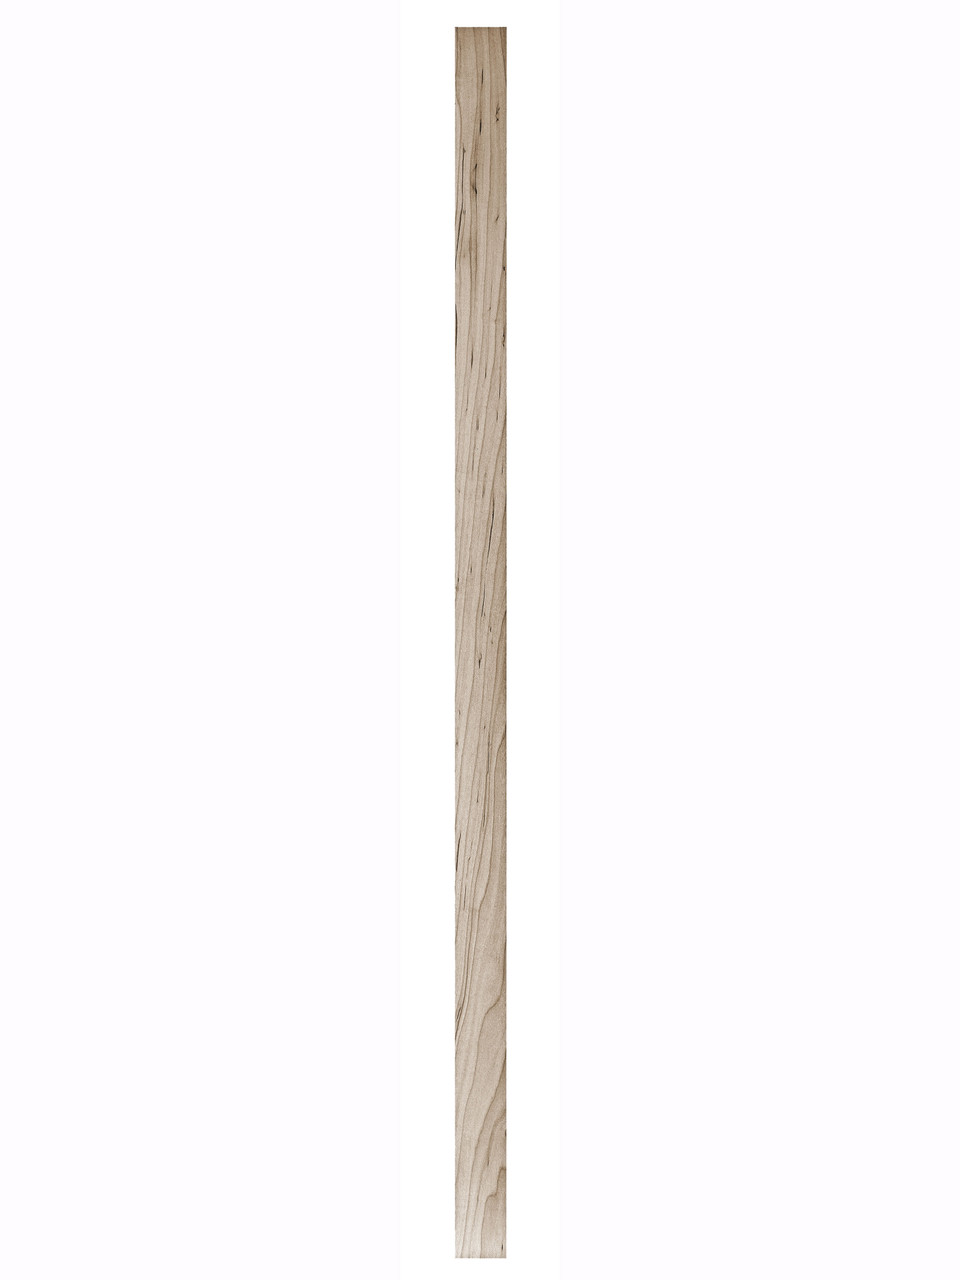 A-100 36" S4S Baluster (2)